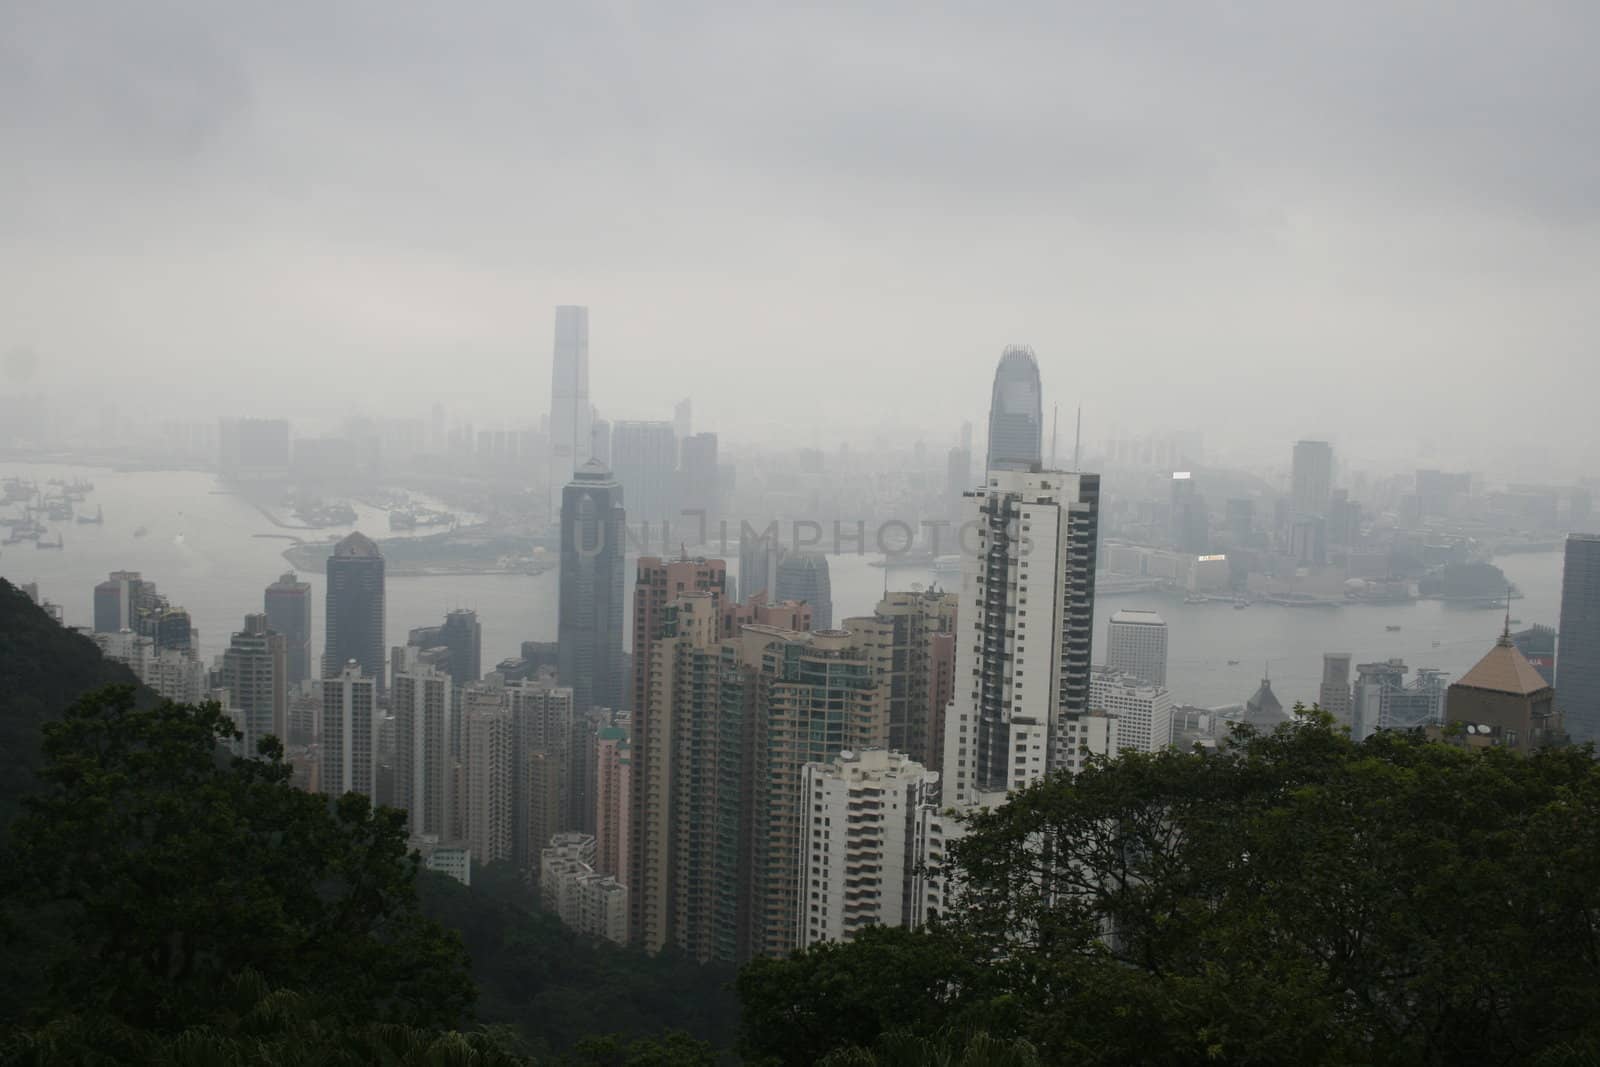 Hong Kong skyline as seen from the peak of the harbor